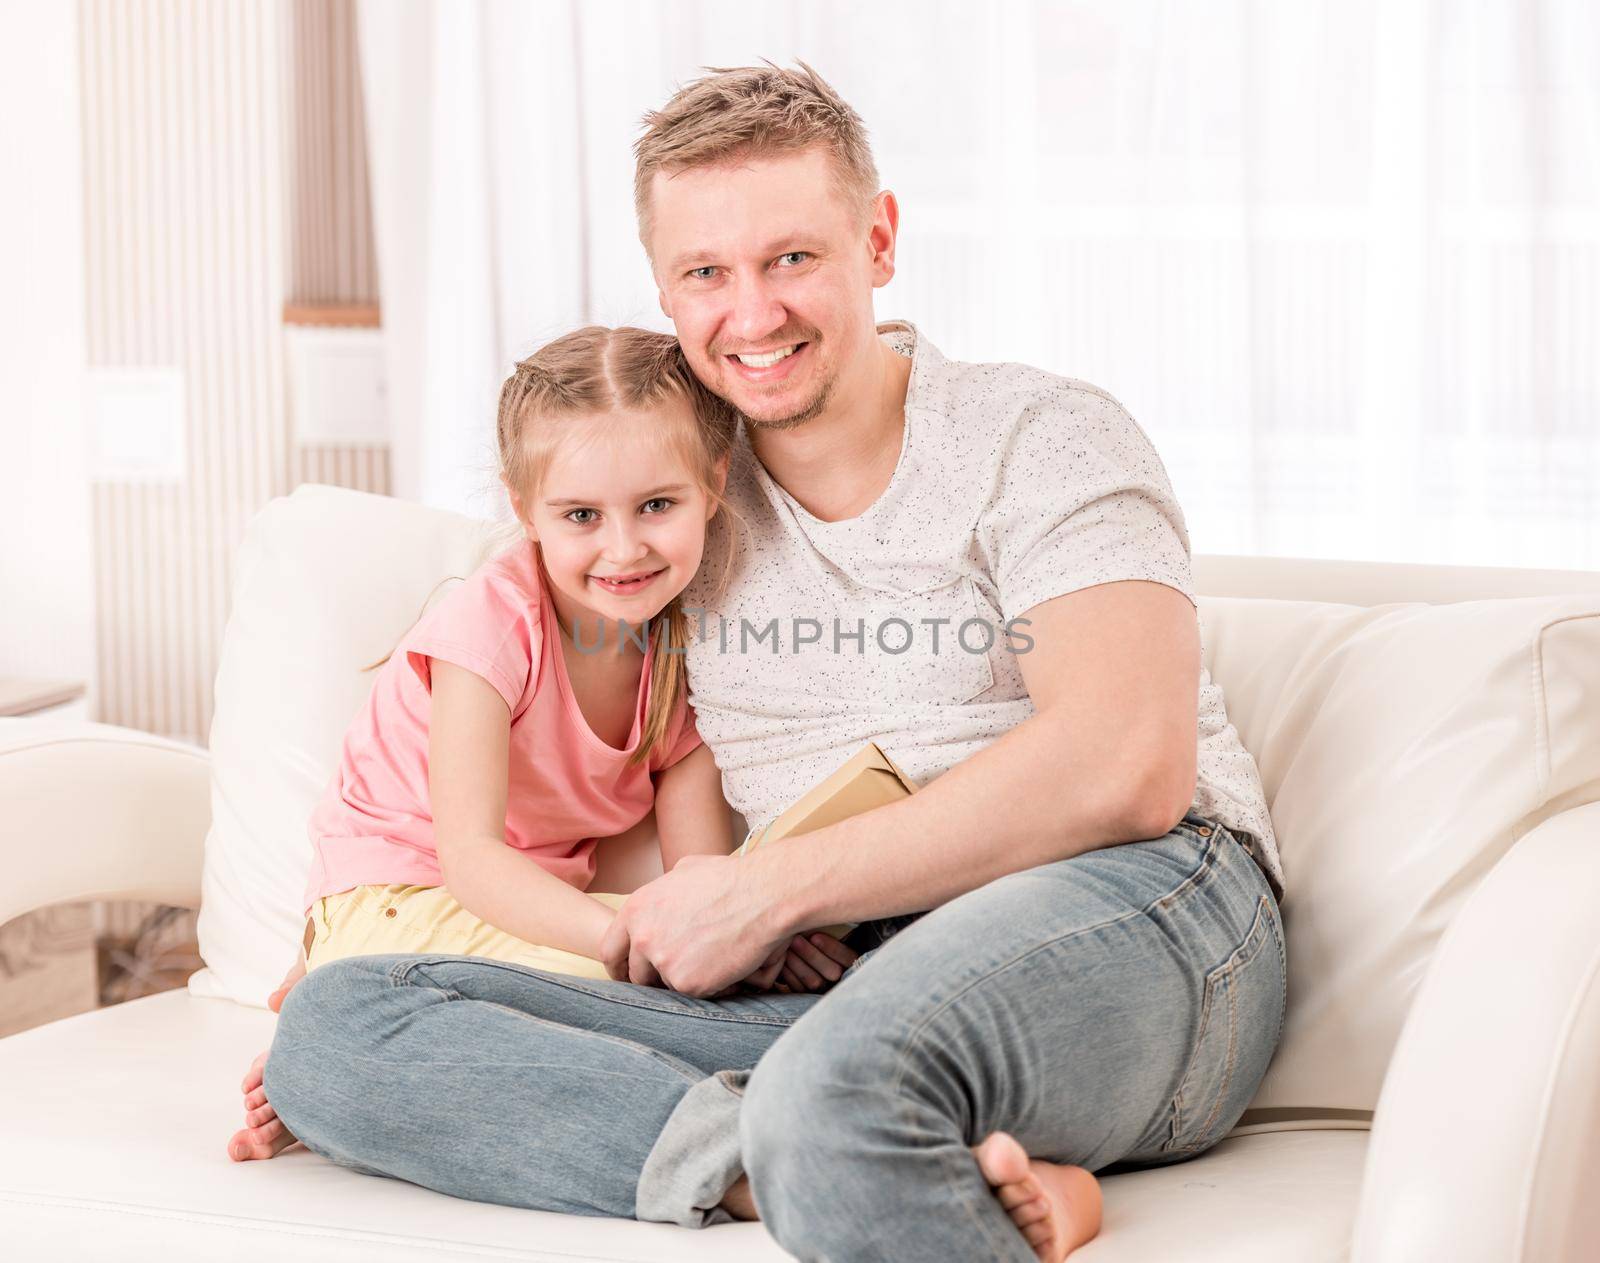 Dad and daughter sitting on the couch by tan4ikk1